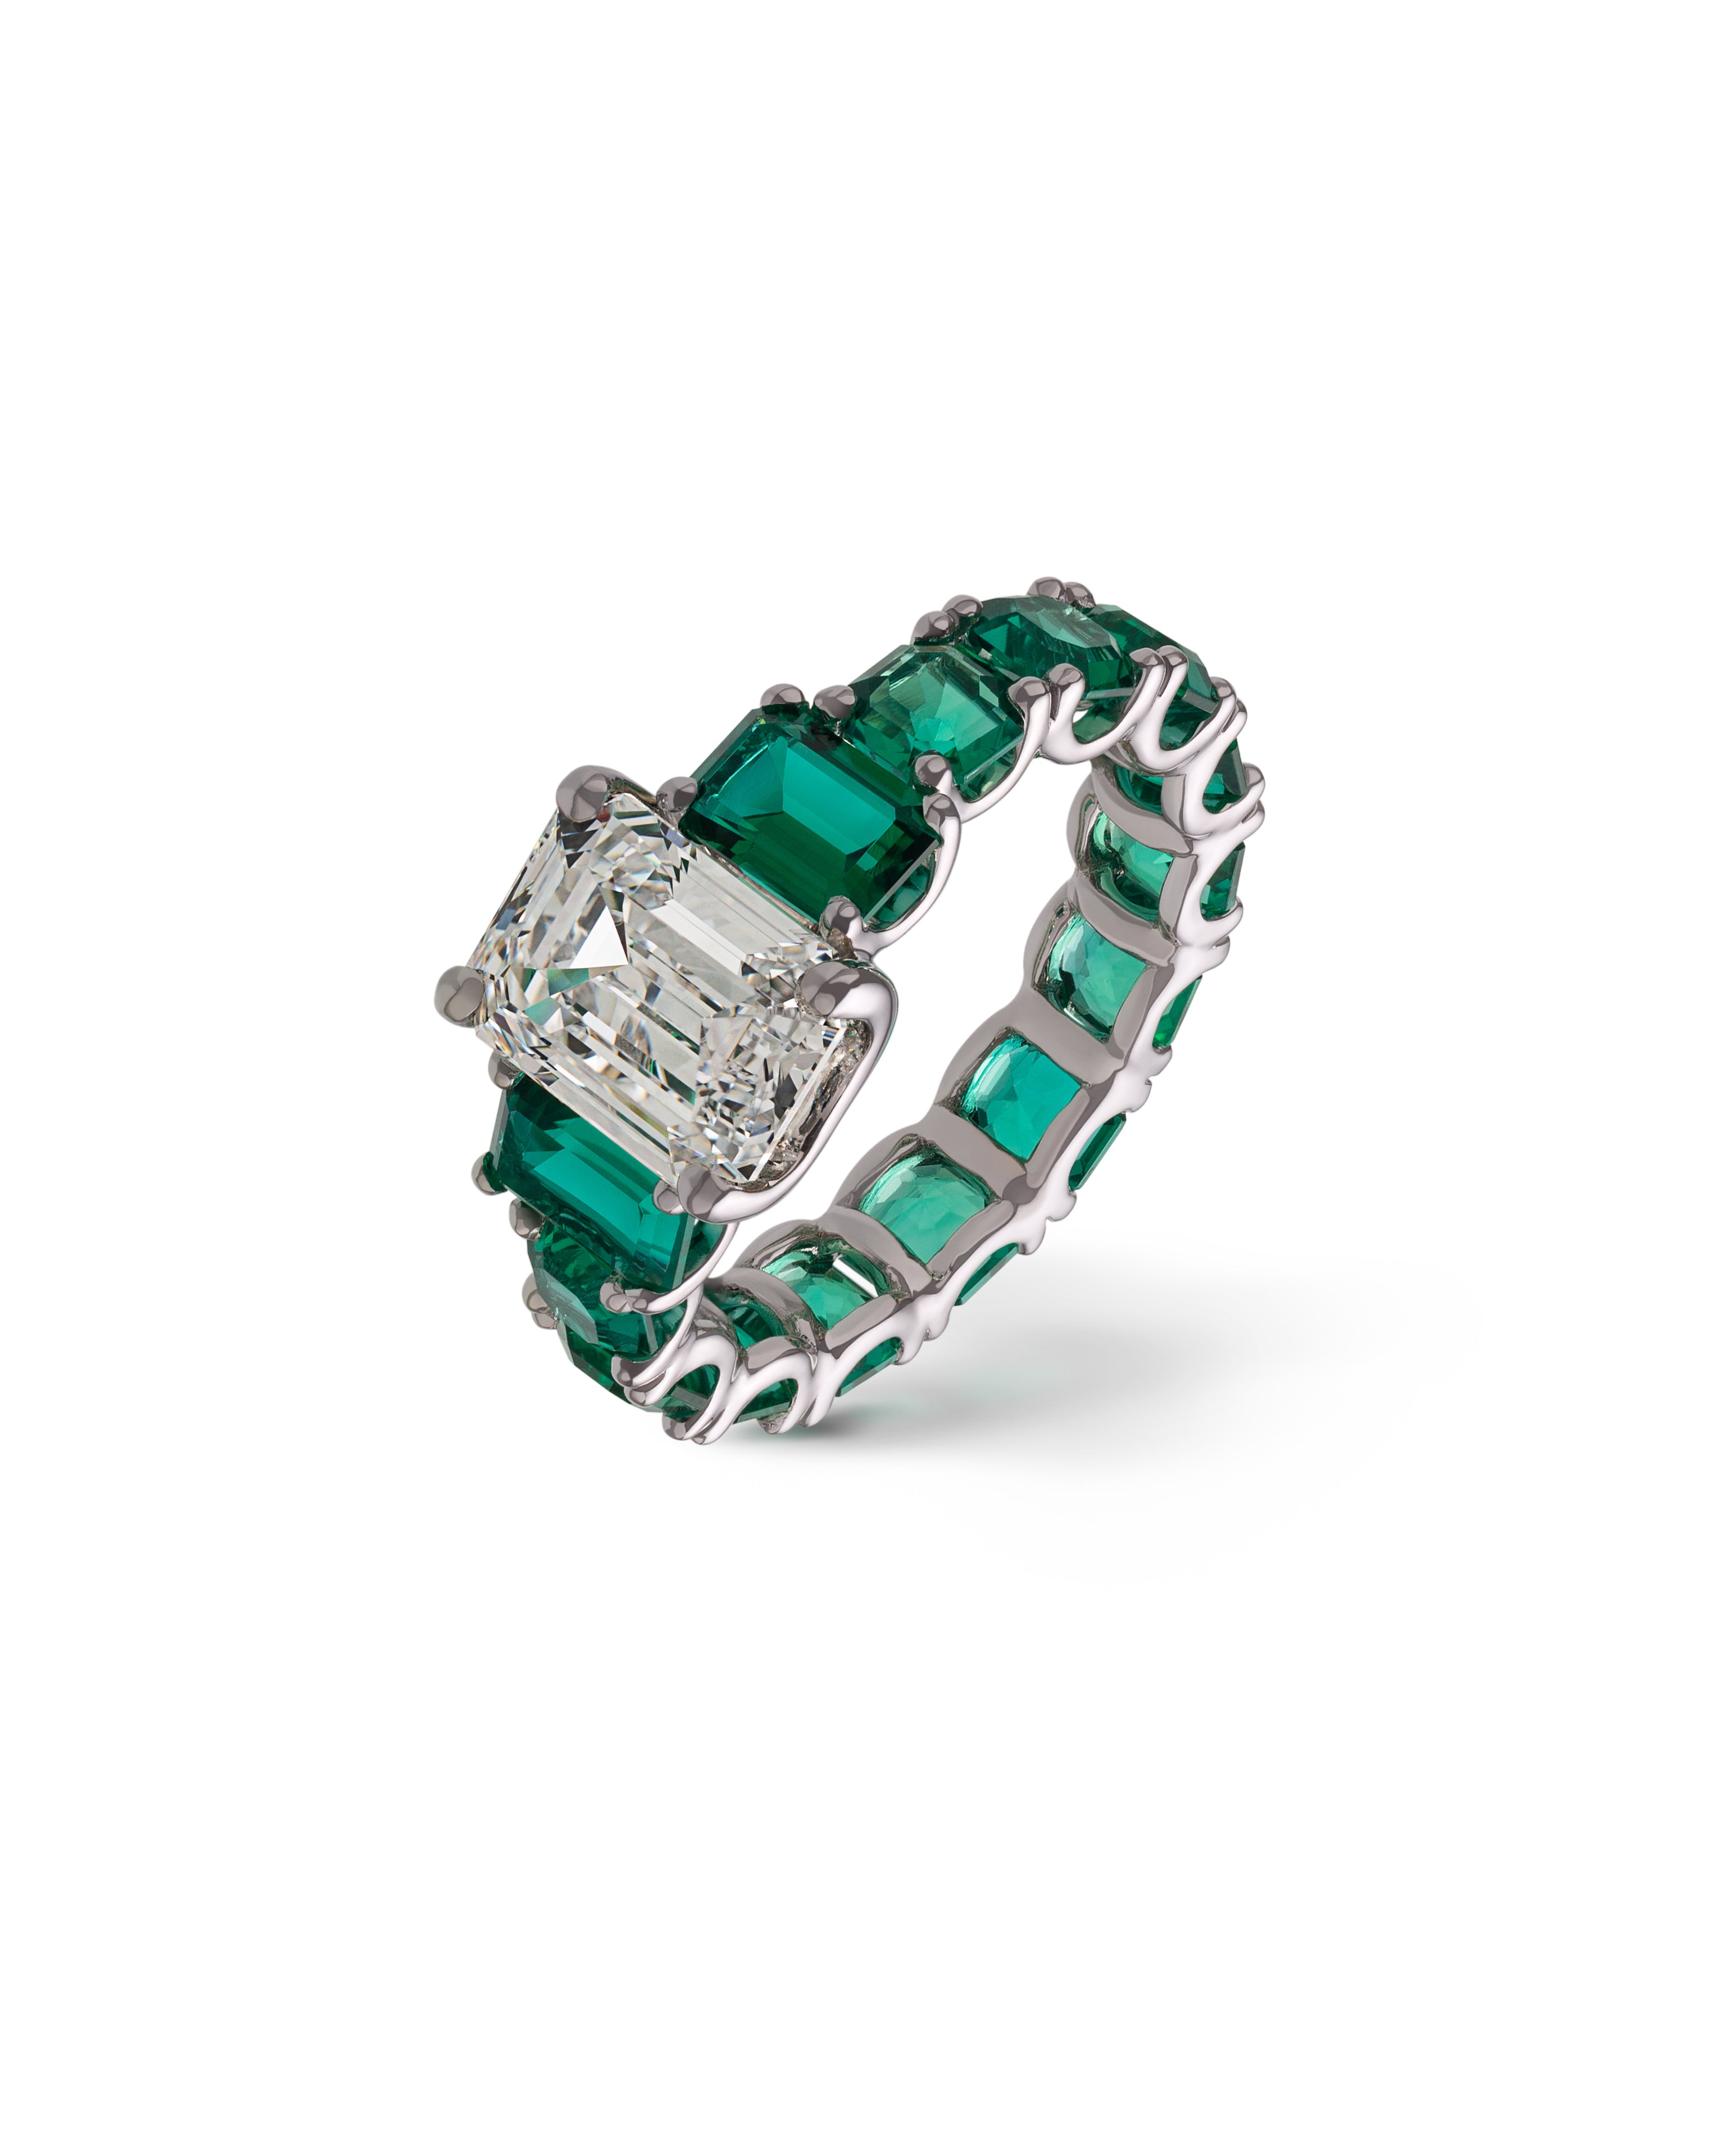 EL16 Ring with a diamond and emeralds